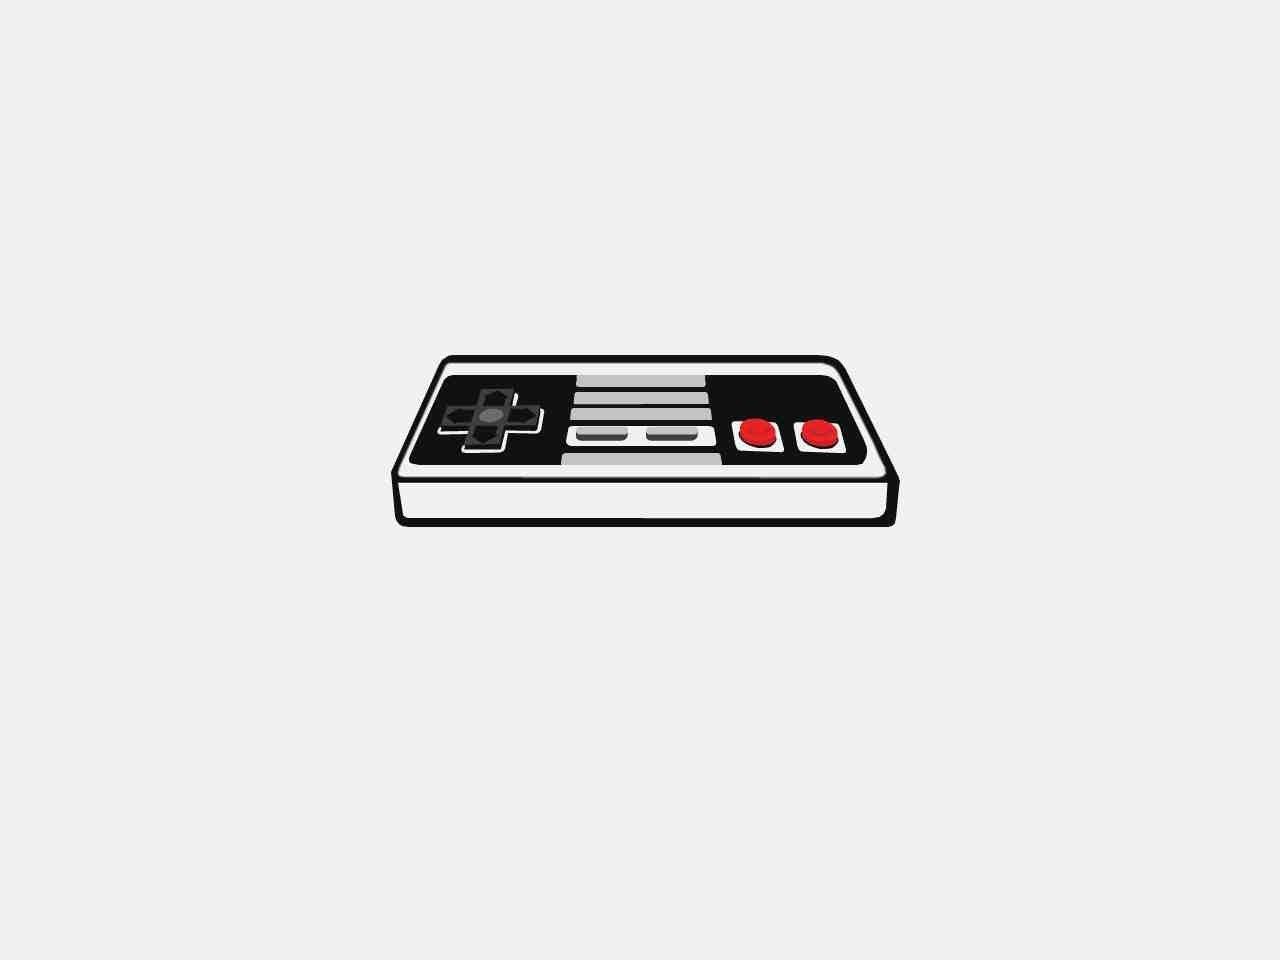 Wallpaper, 1280x960 px, controllers, Nintendo Entertainment System, retro games, simple background, white background 1280x960